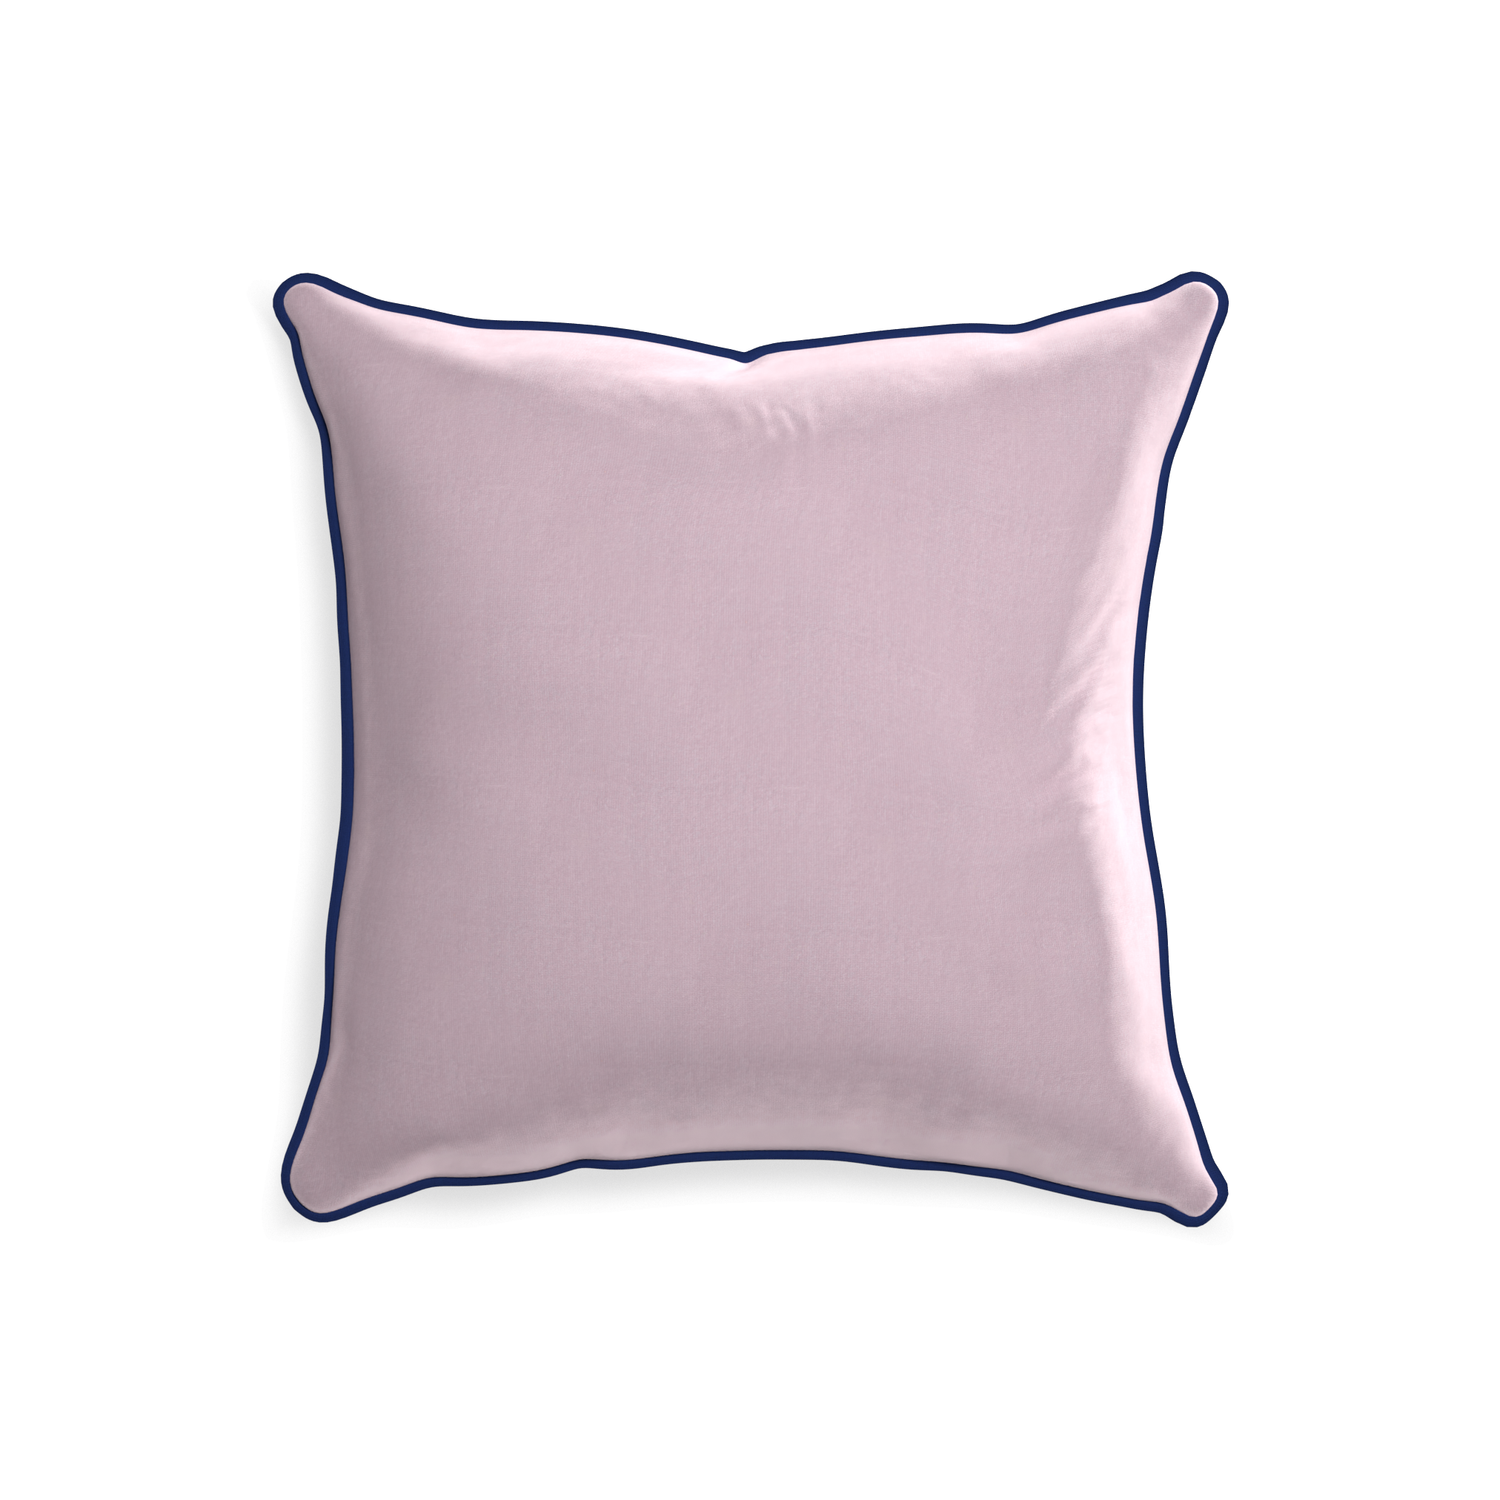 20-square lilac velvet custom pillow with midnight piping on white background